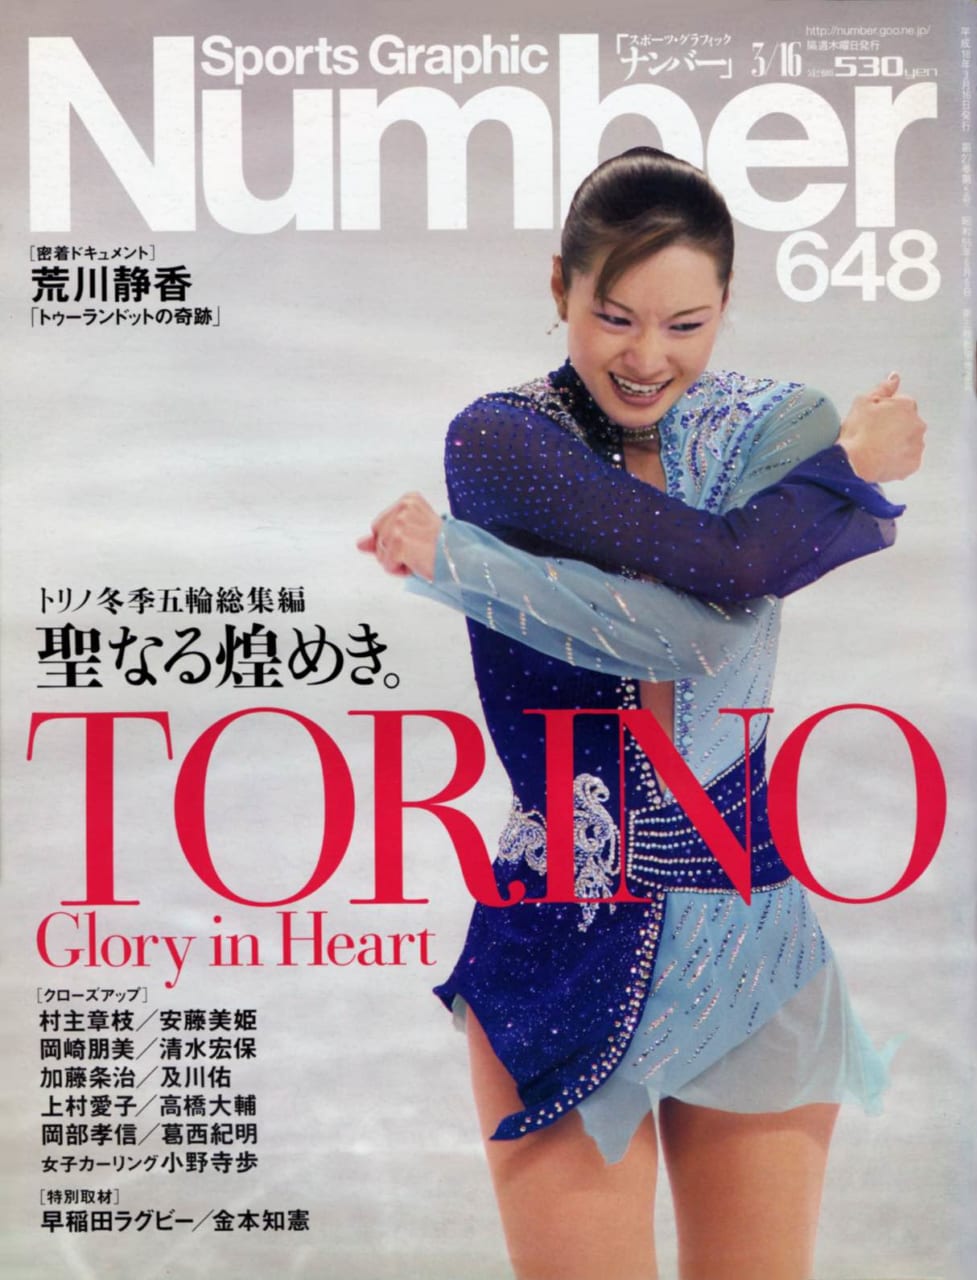 Sports Graphic Number 648号
2006年3月2日発売
表紙撮影：岸本勉